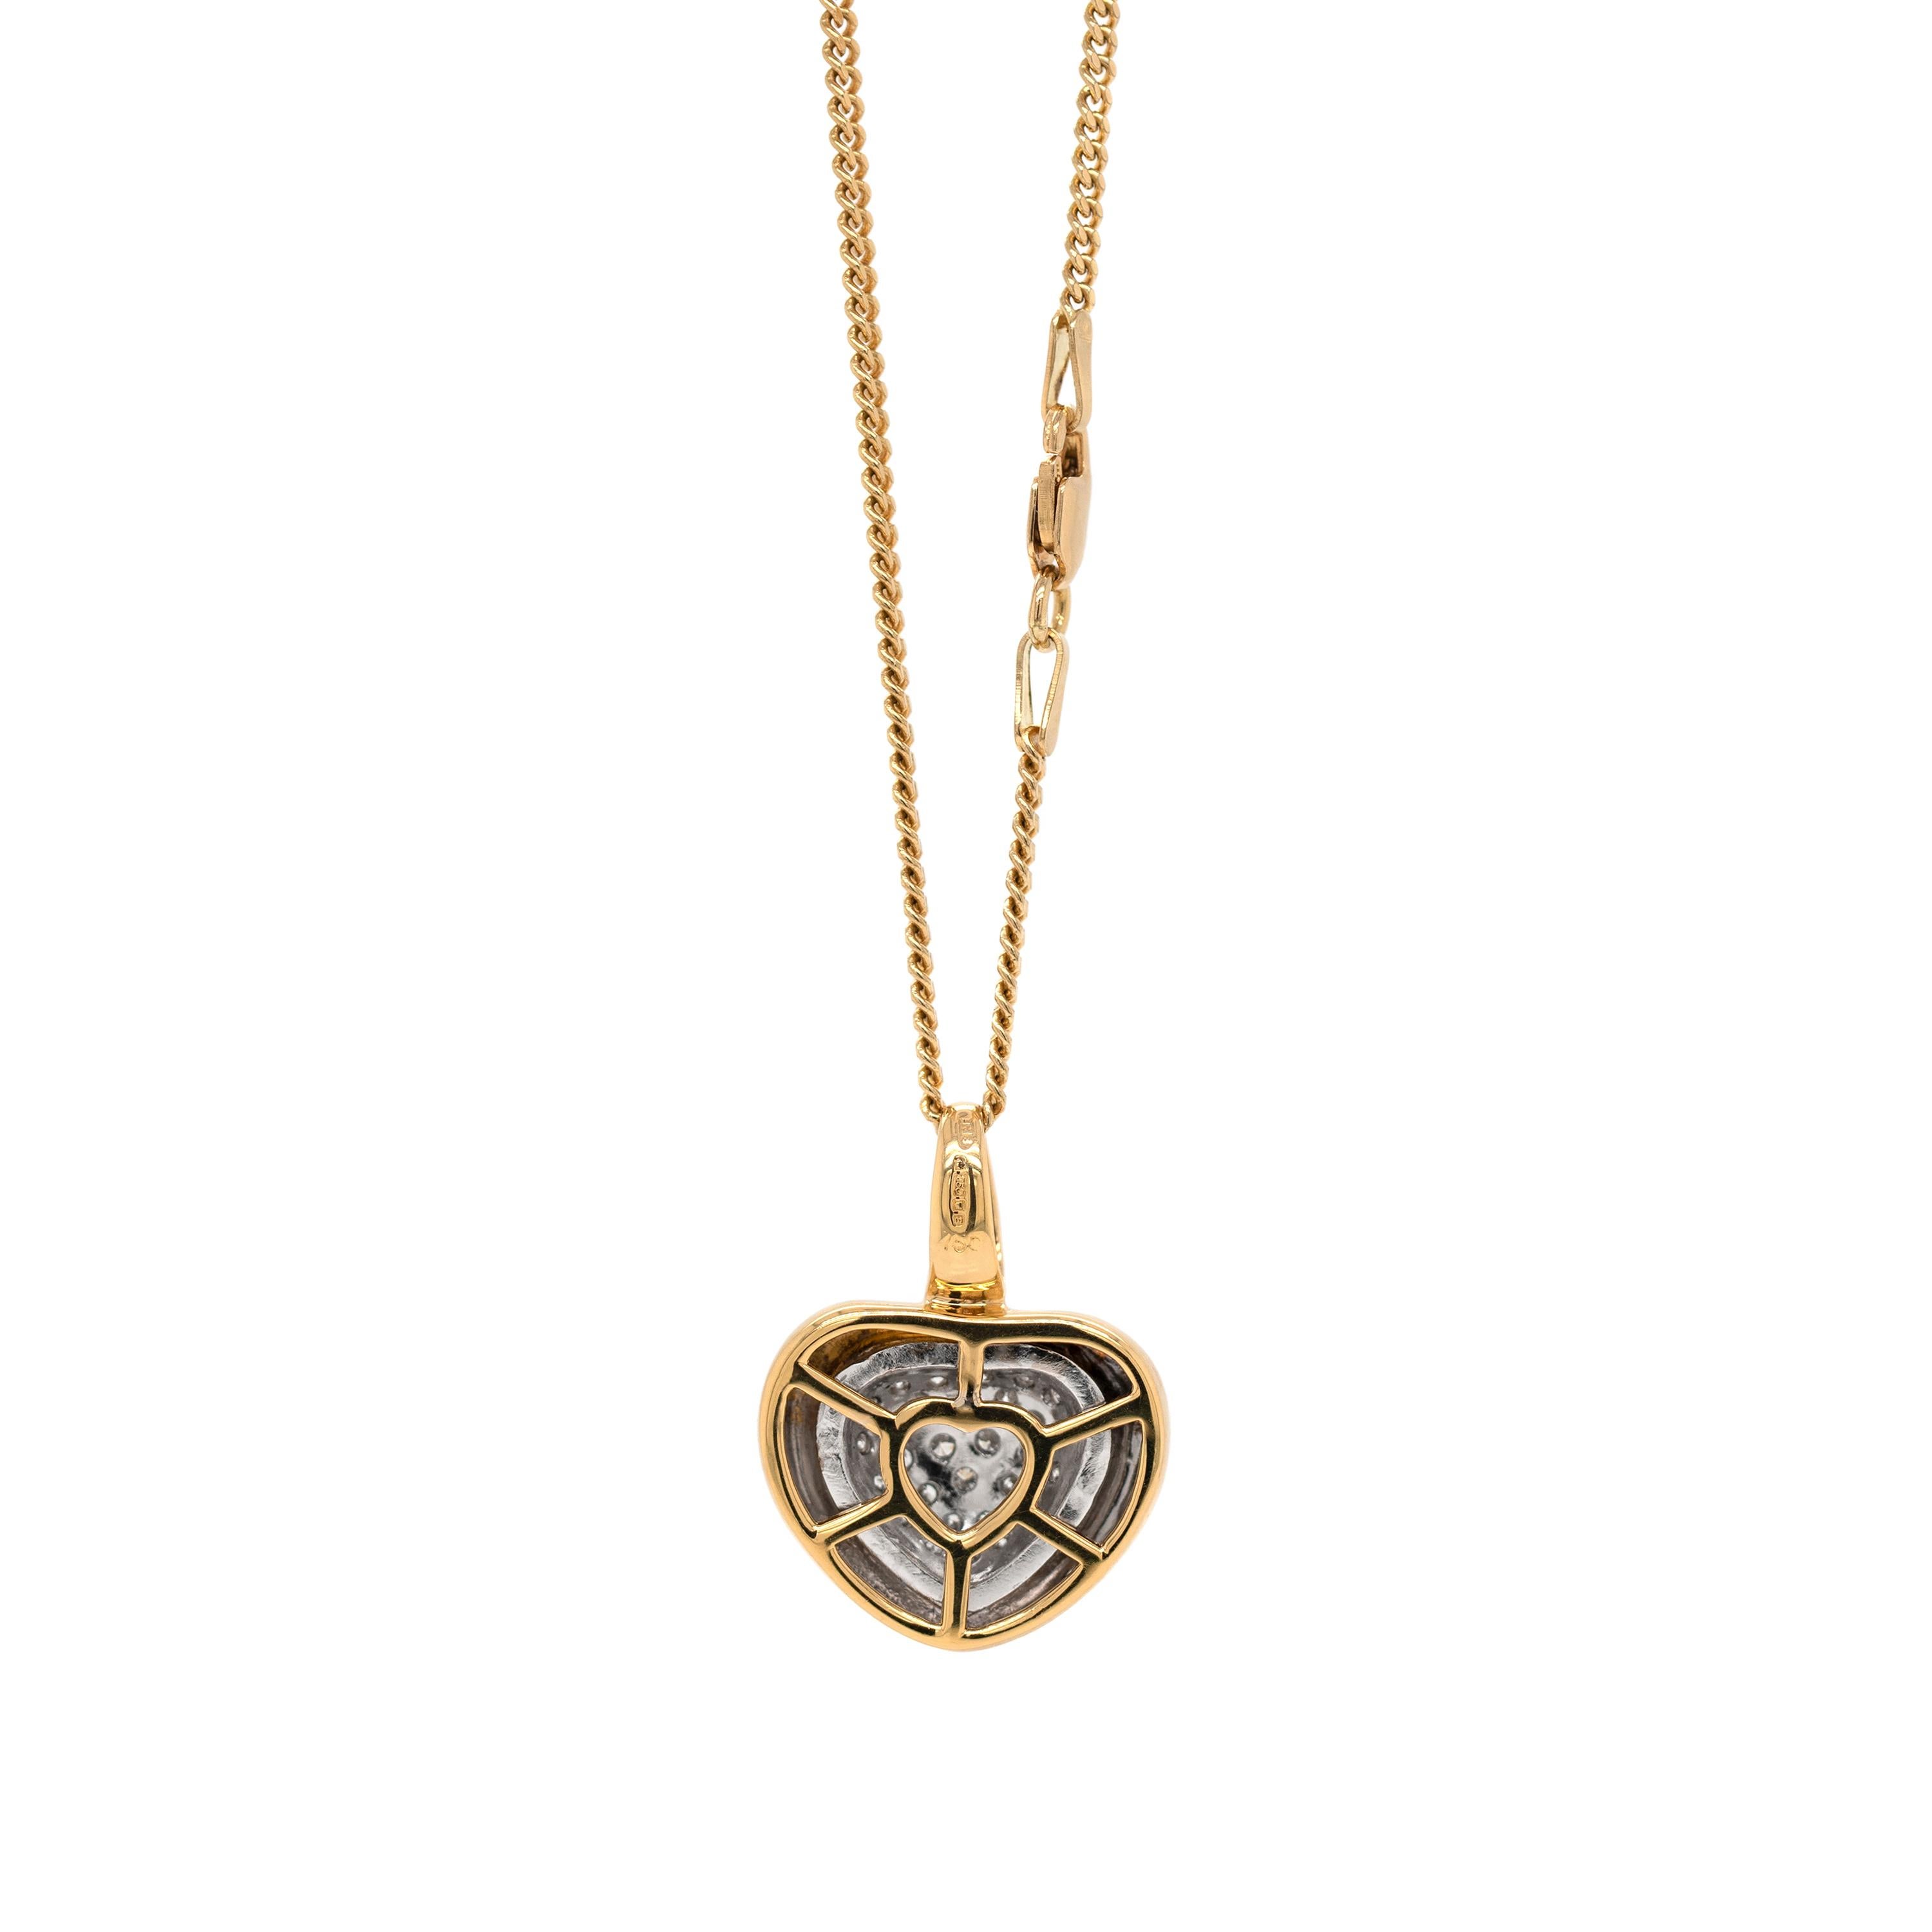 This beautiful 18 carat gold pendant features a white gold heart in the centre, pavé set with 29 fine round brilliant cut diamonds, weighing a total approximate weight of 0.60ct. A thick yellow gold border surrounds the centre heart completing the